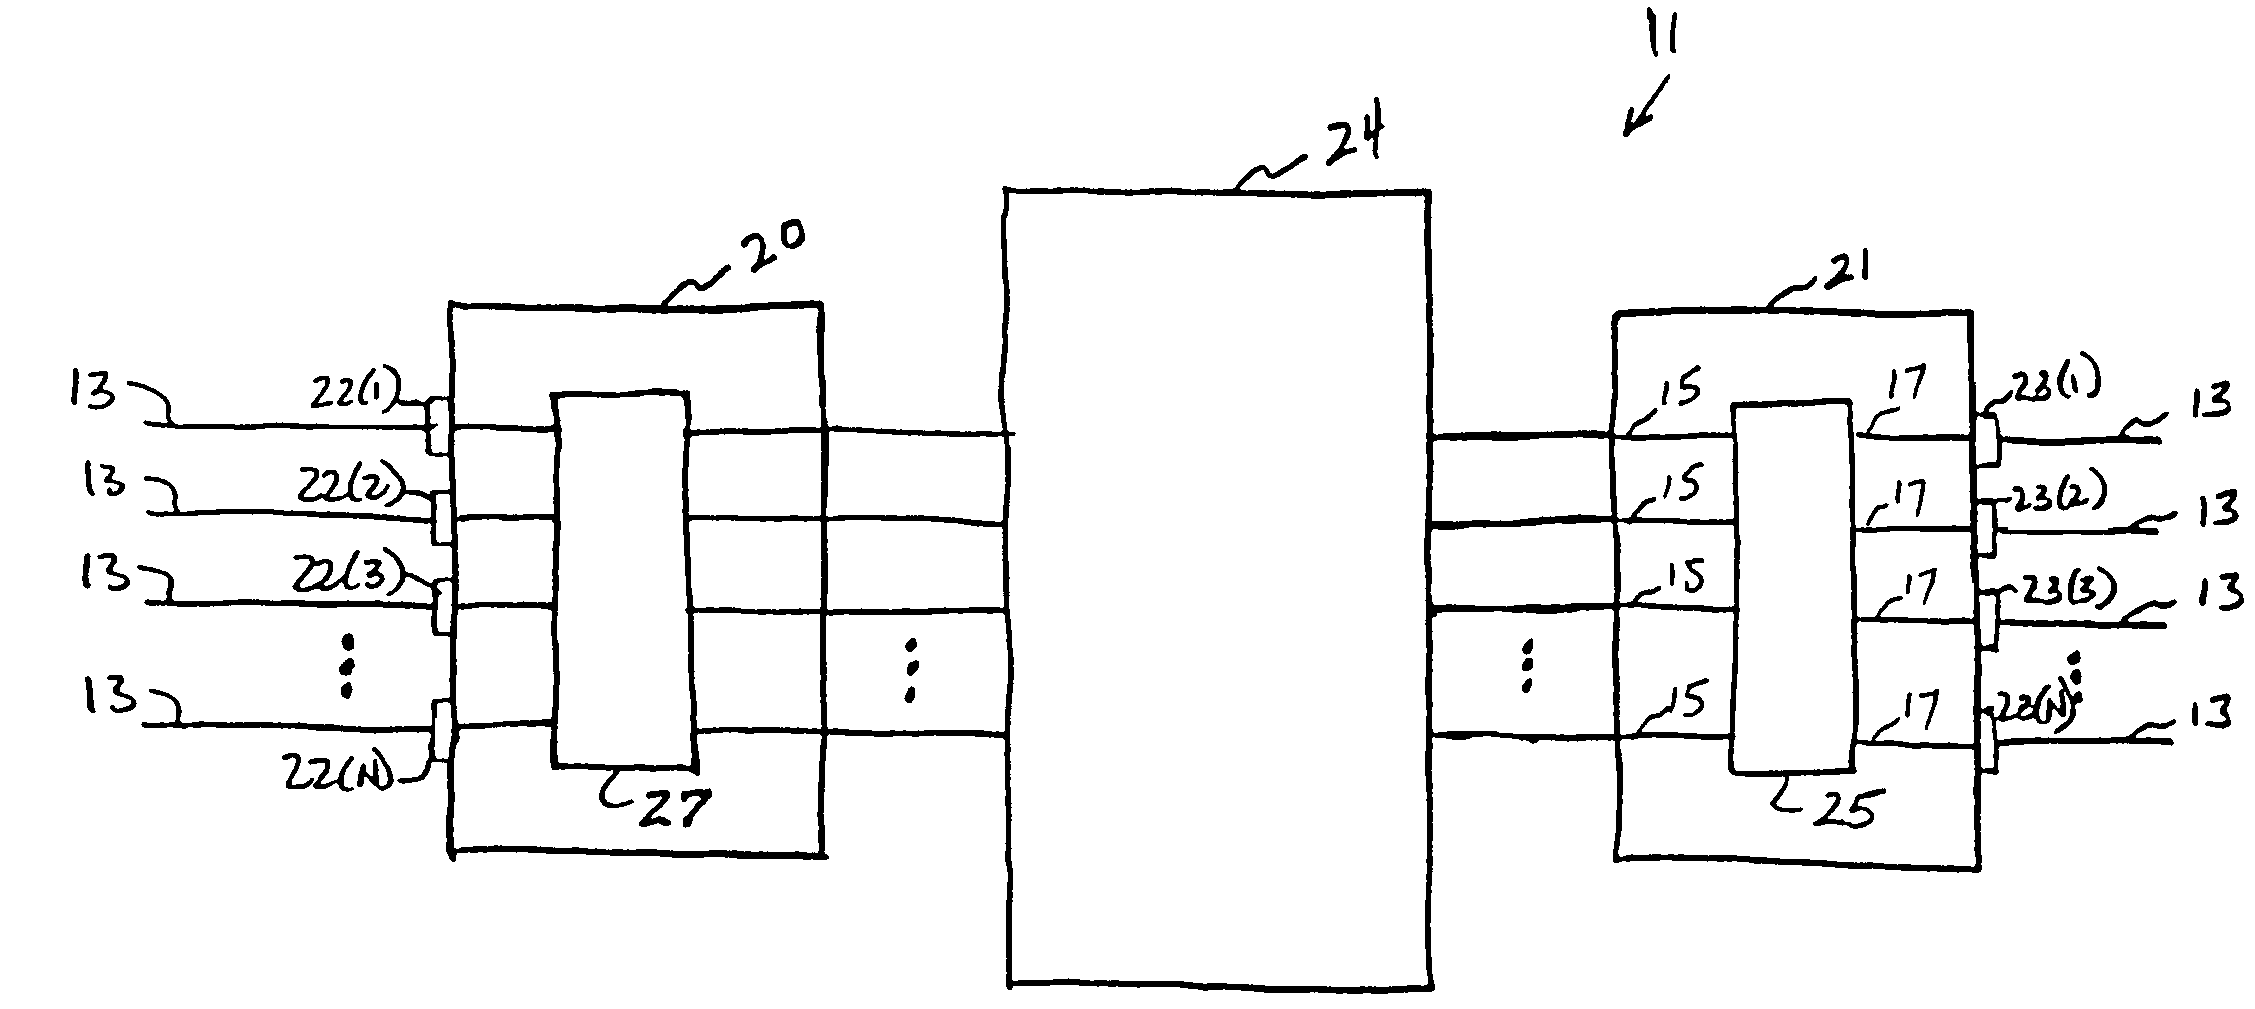 Apparatus and method for controlling queuing of data at a node on a network